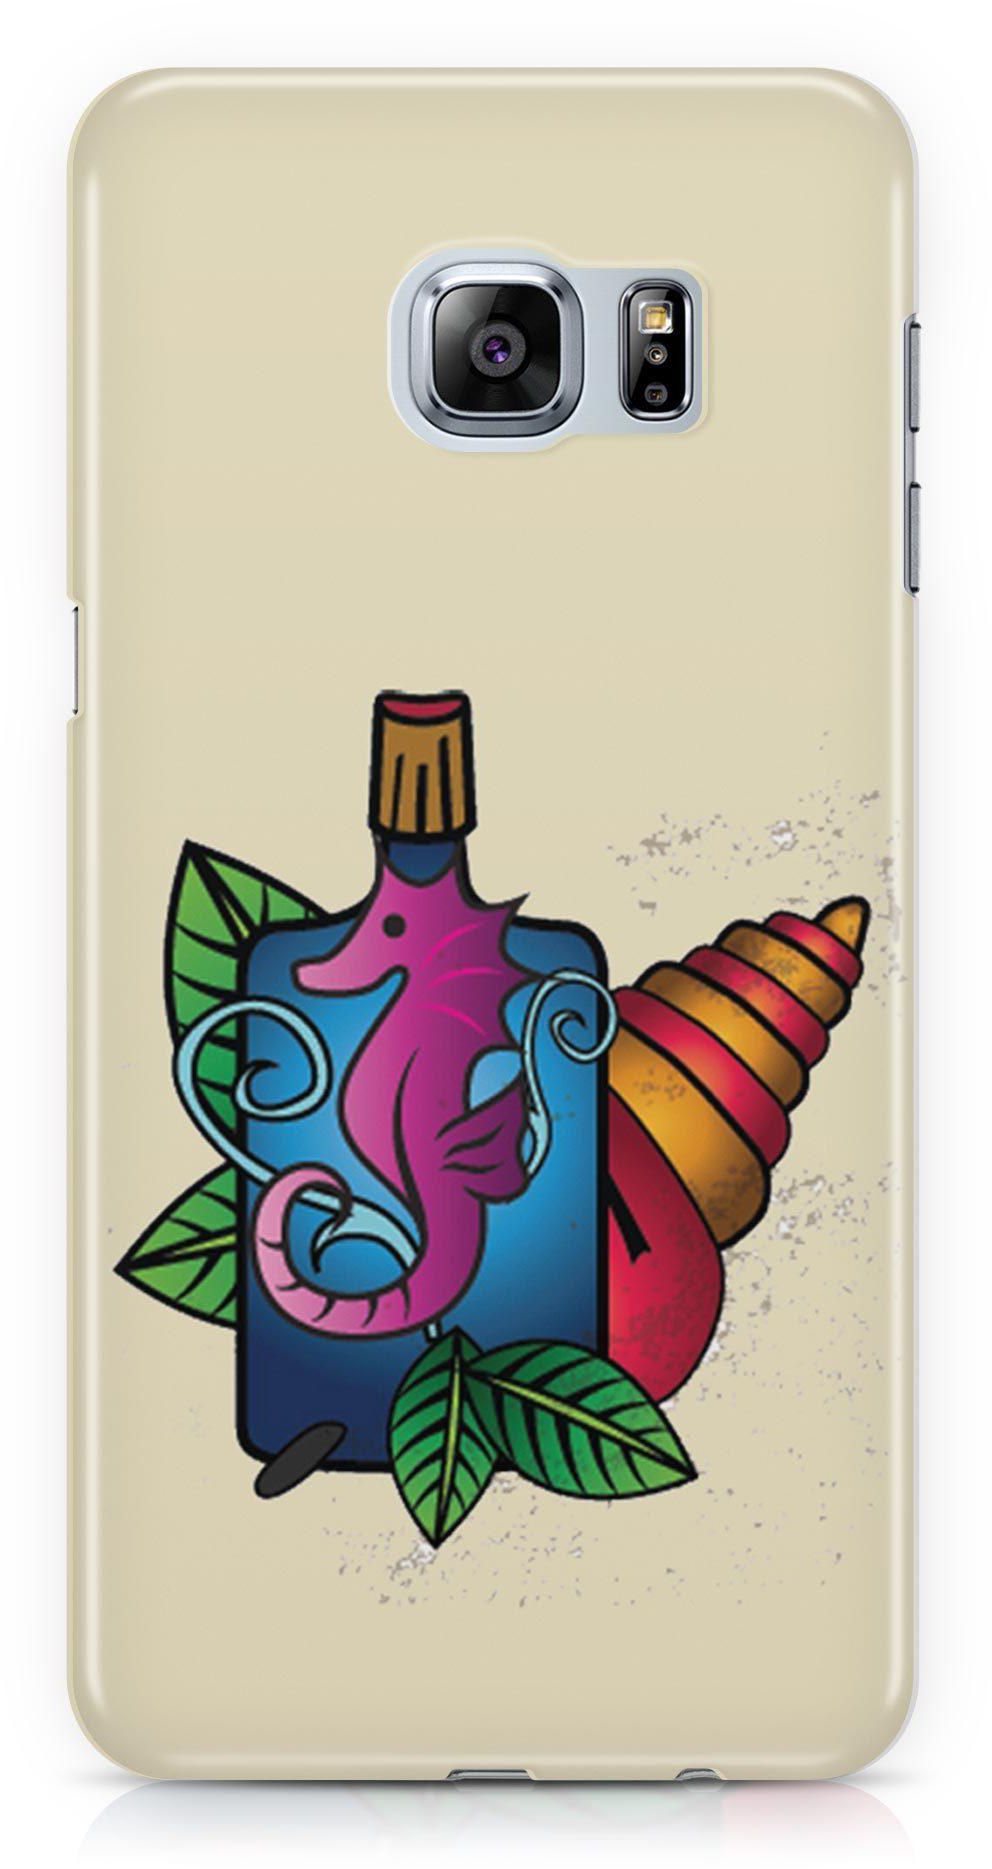 Sea Lion Blue Bottle Sea Shell Seafish Phone Case Cover for Samsung S6